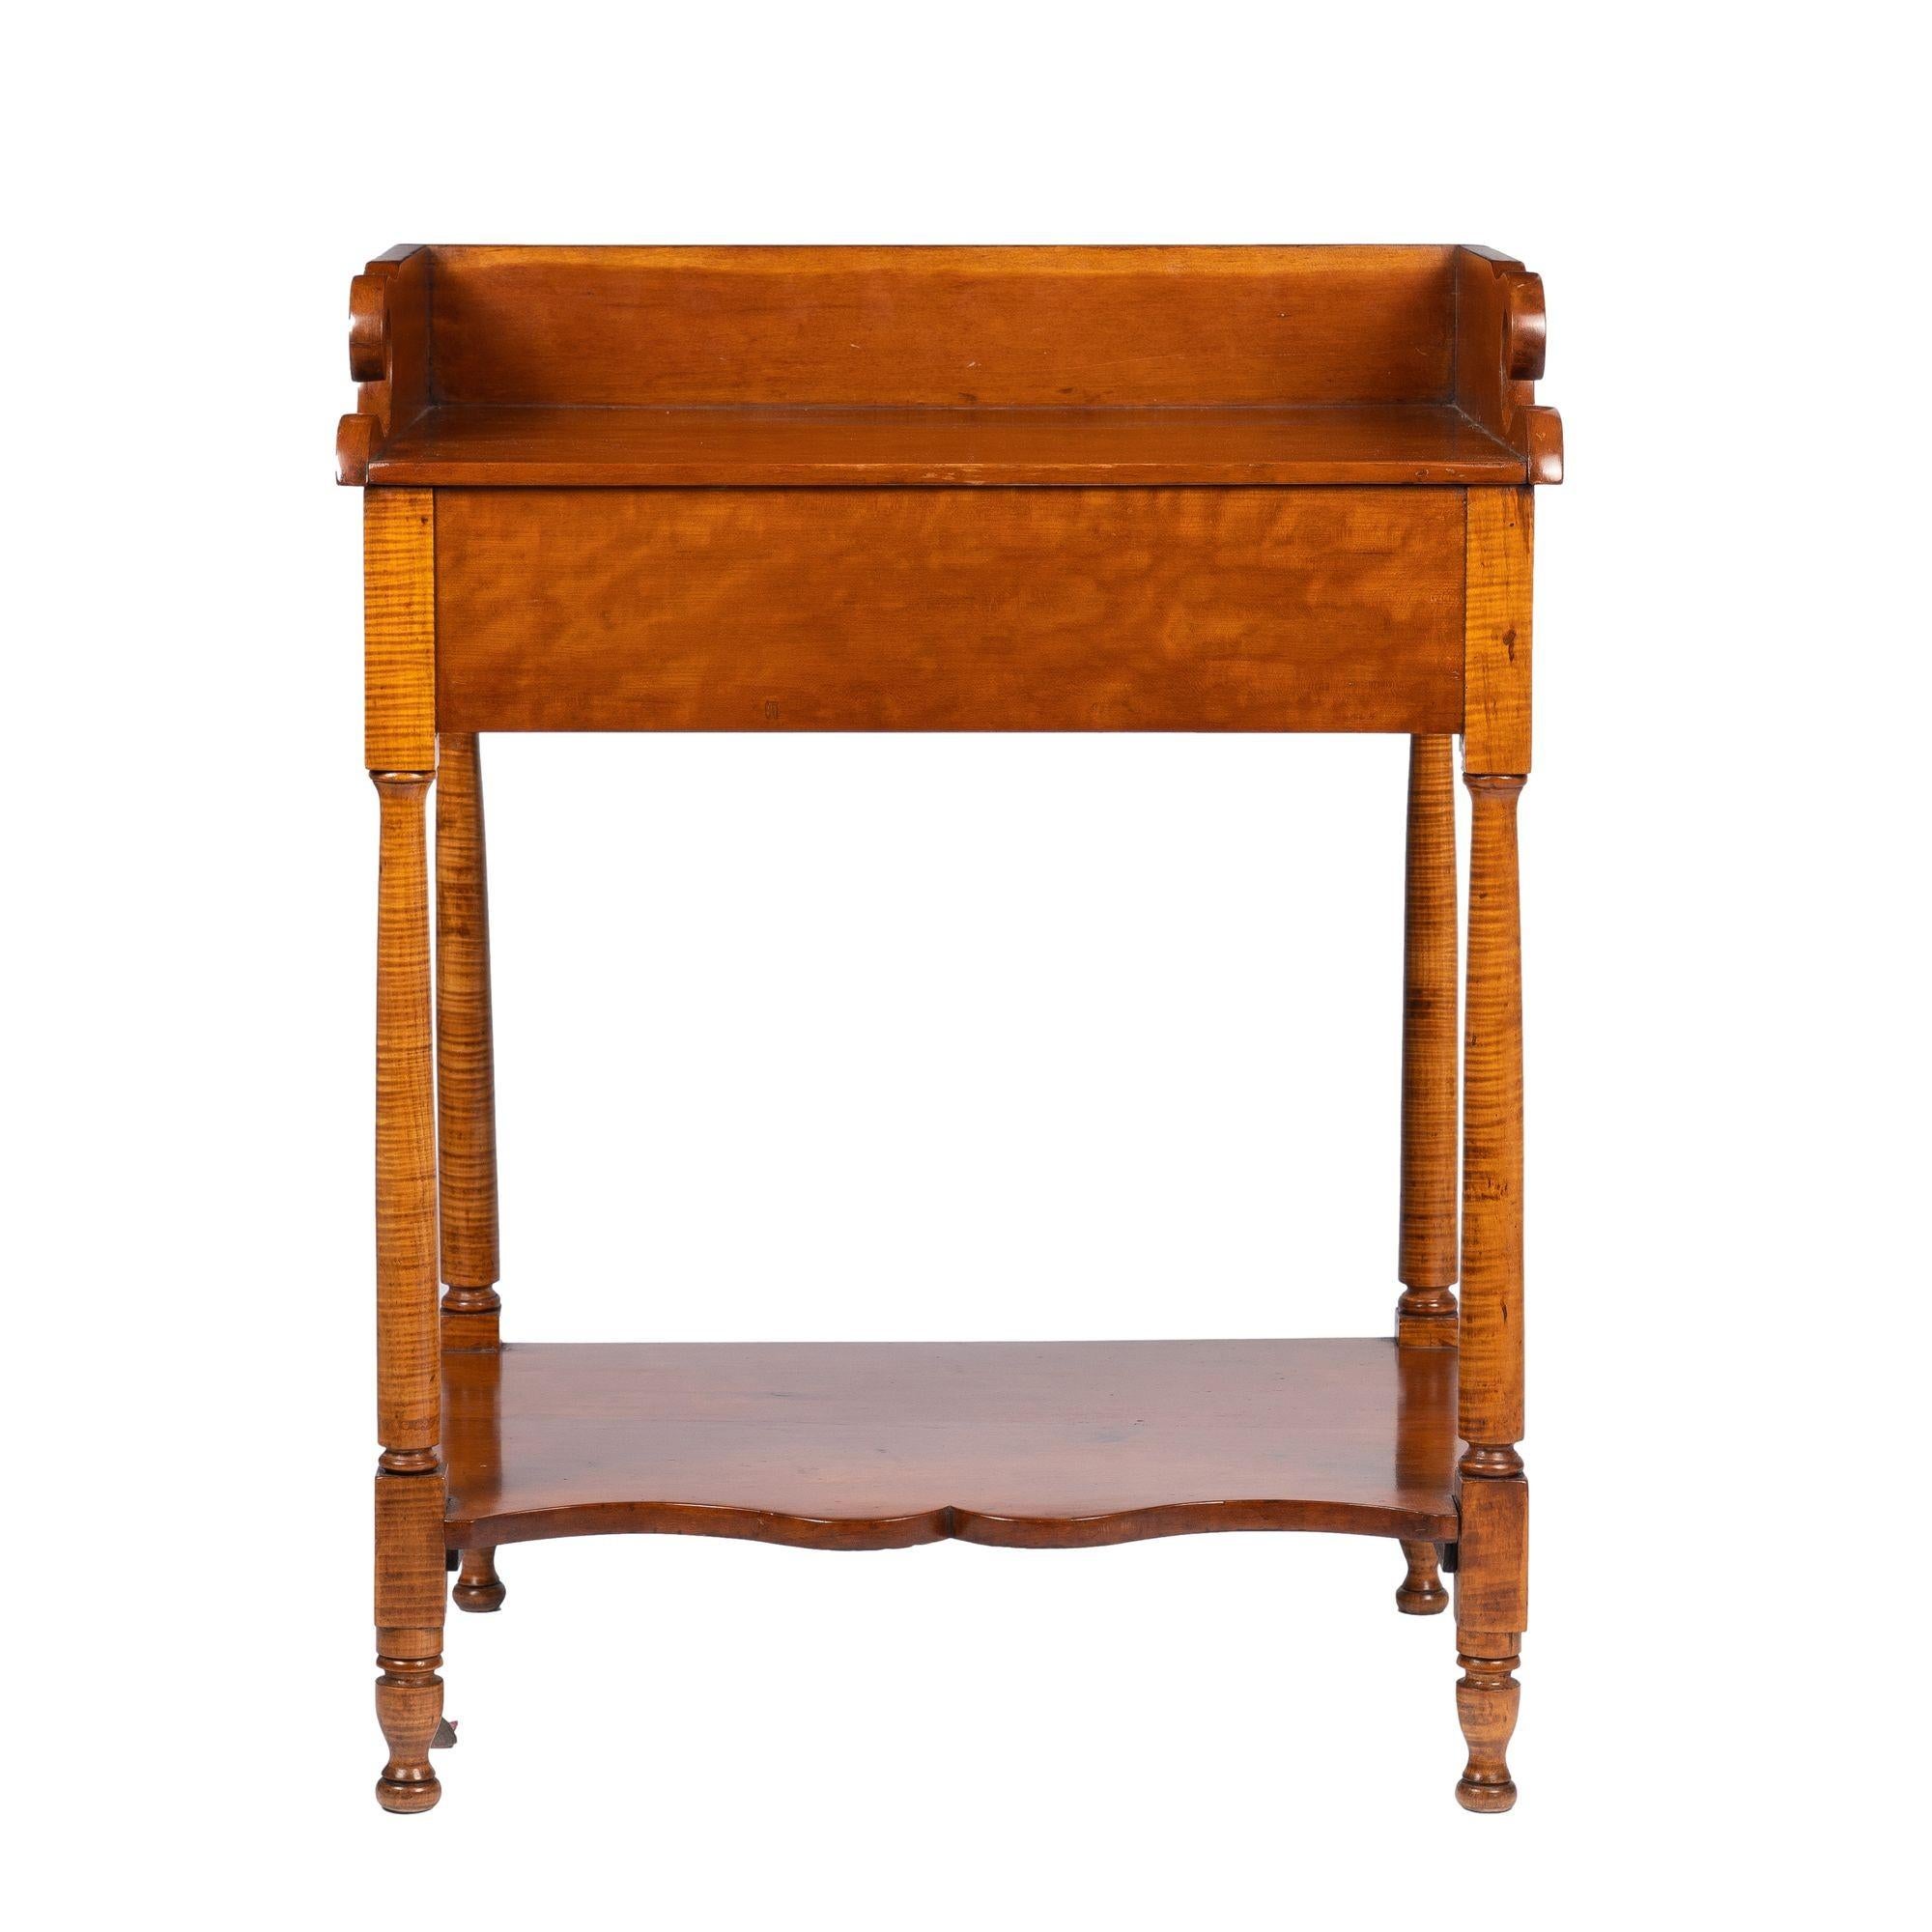 Philadelphia Cherry Wood Stand with Splash on a Conforming Apron, 1820 For Sale 3